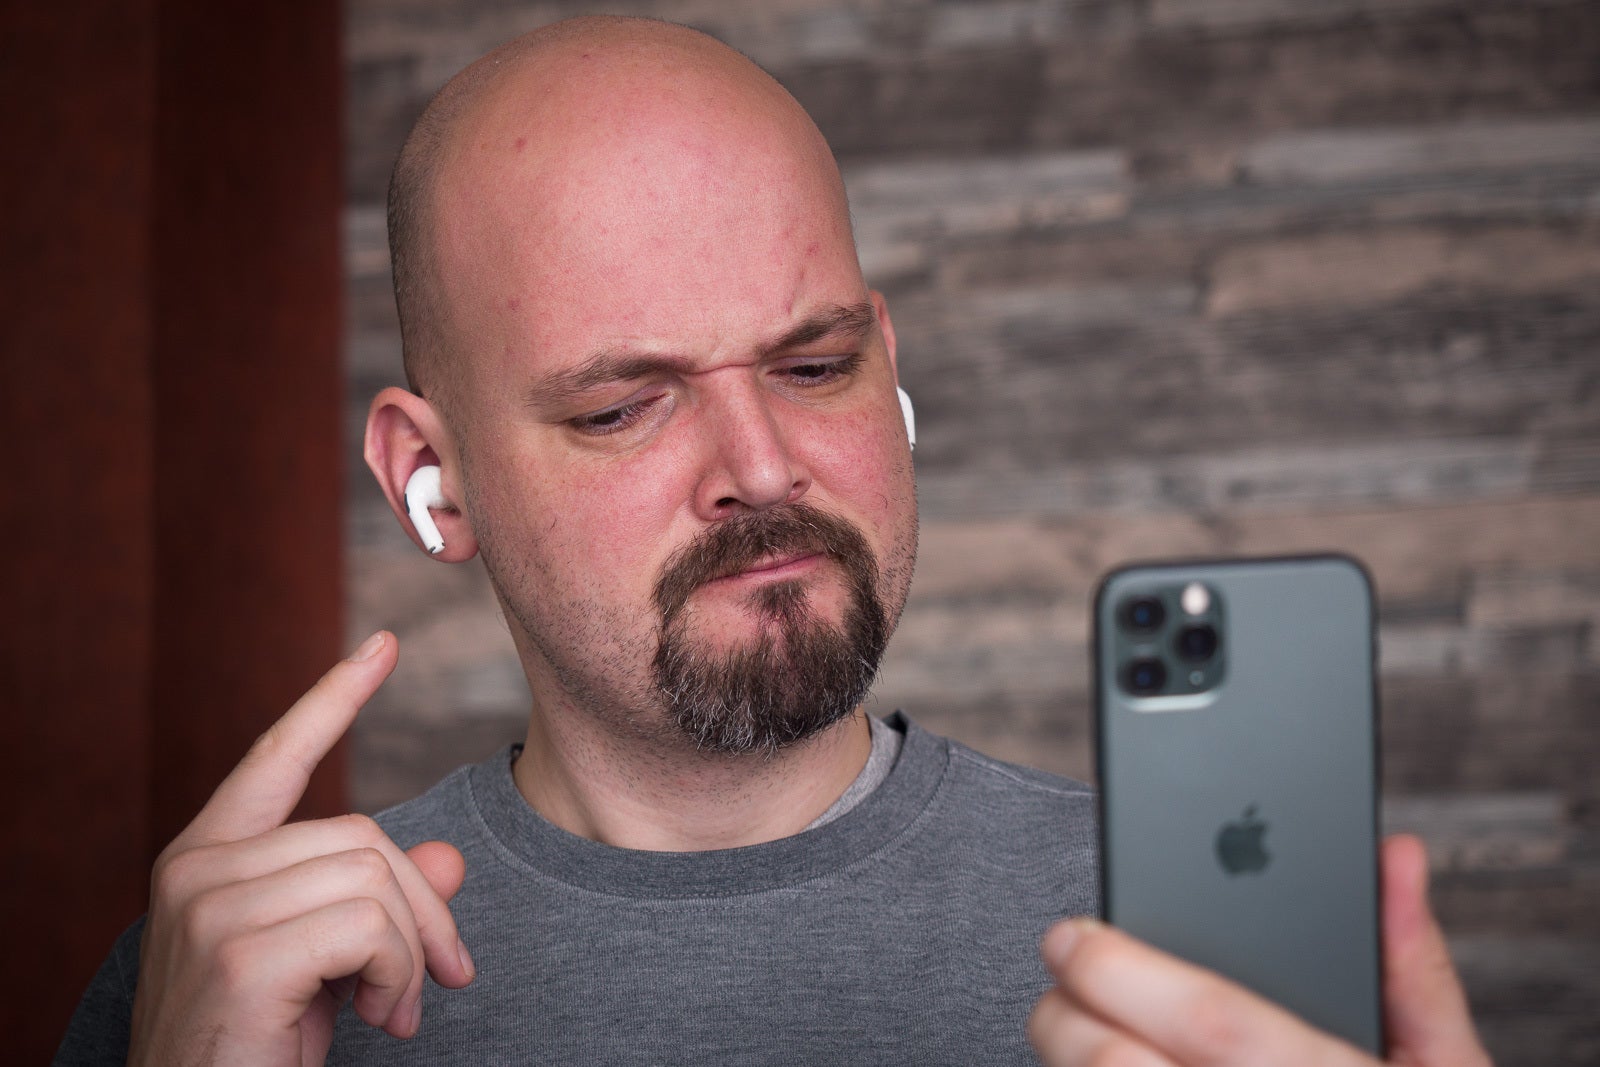 Real AirPods Pro vs fake AirPods Pro: differences, how to spot them, quality comparison